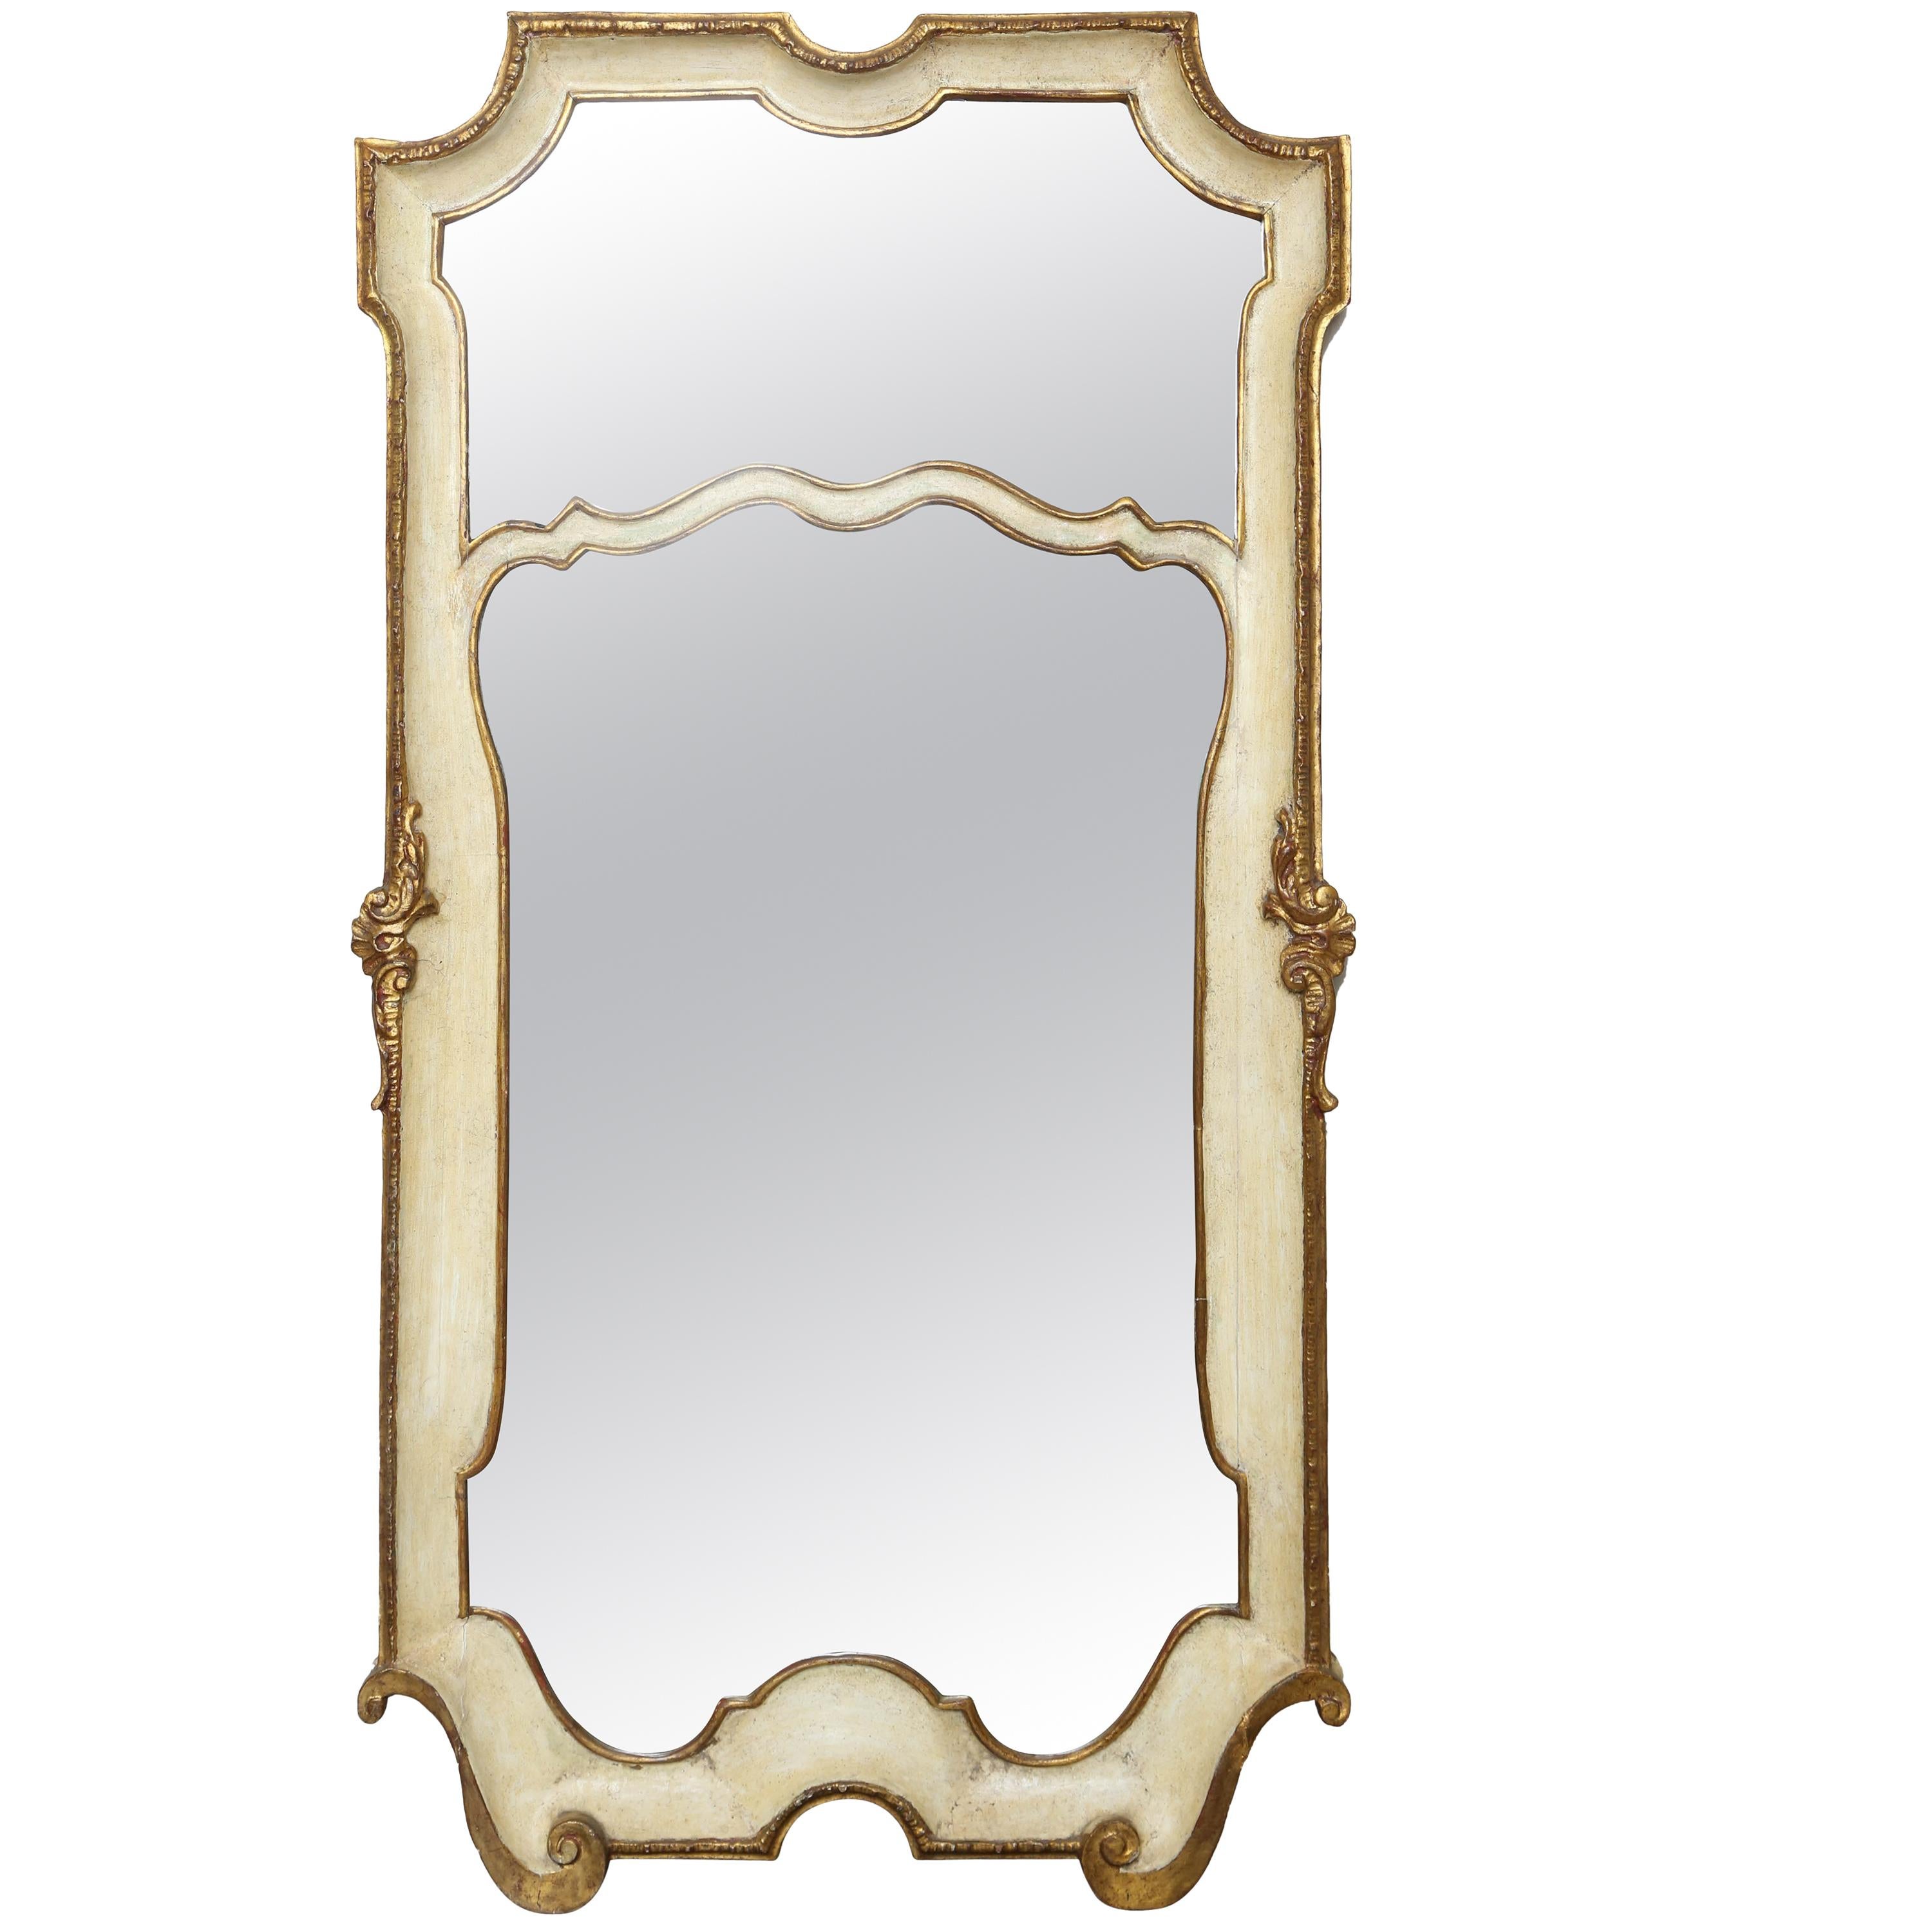 Italian Painted and Gilded Mirror by Palladio